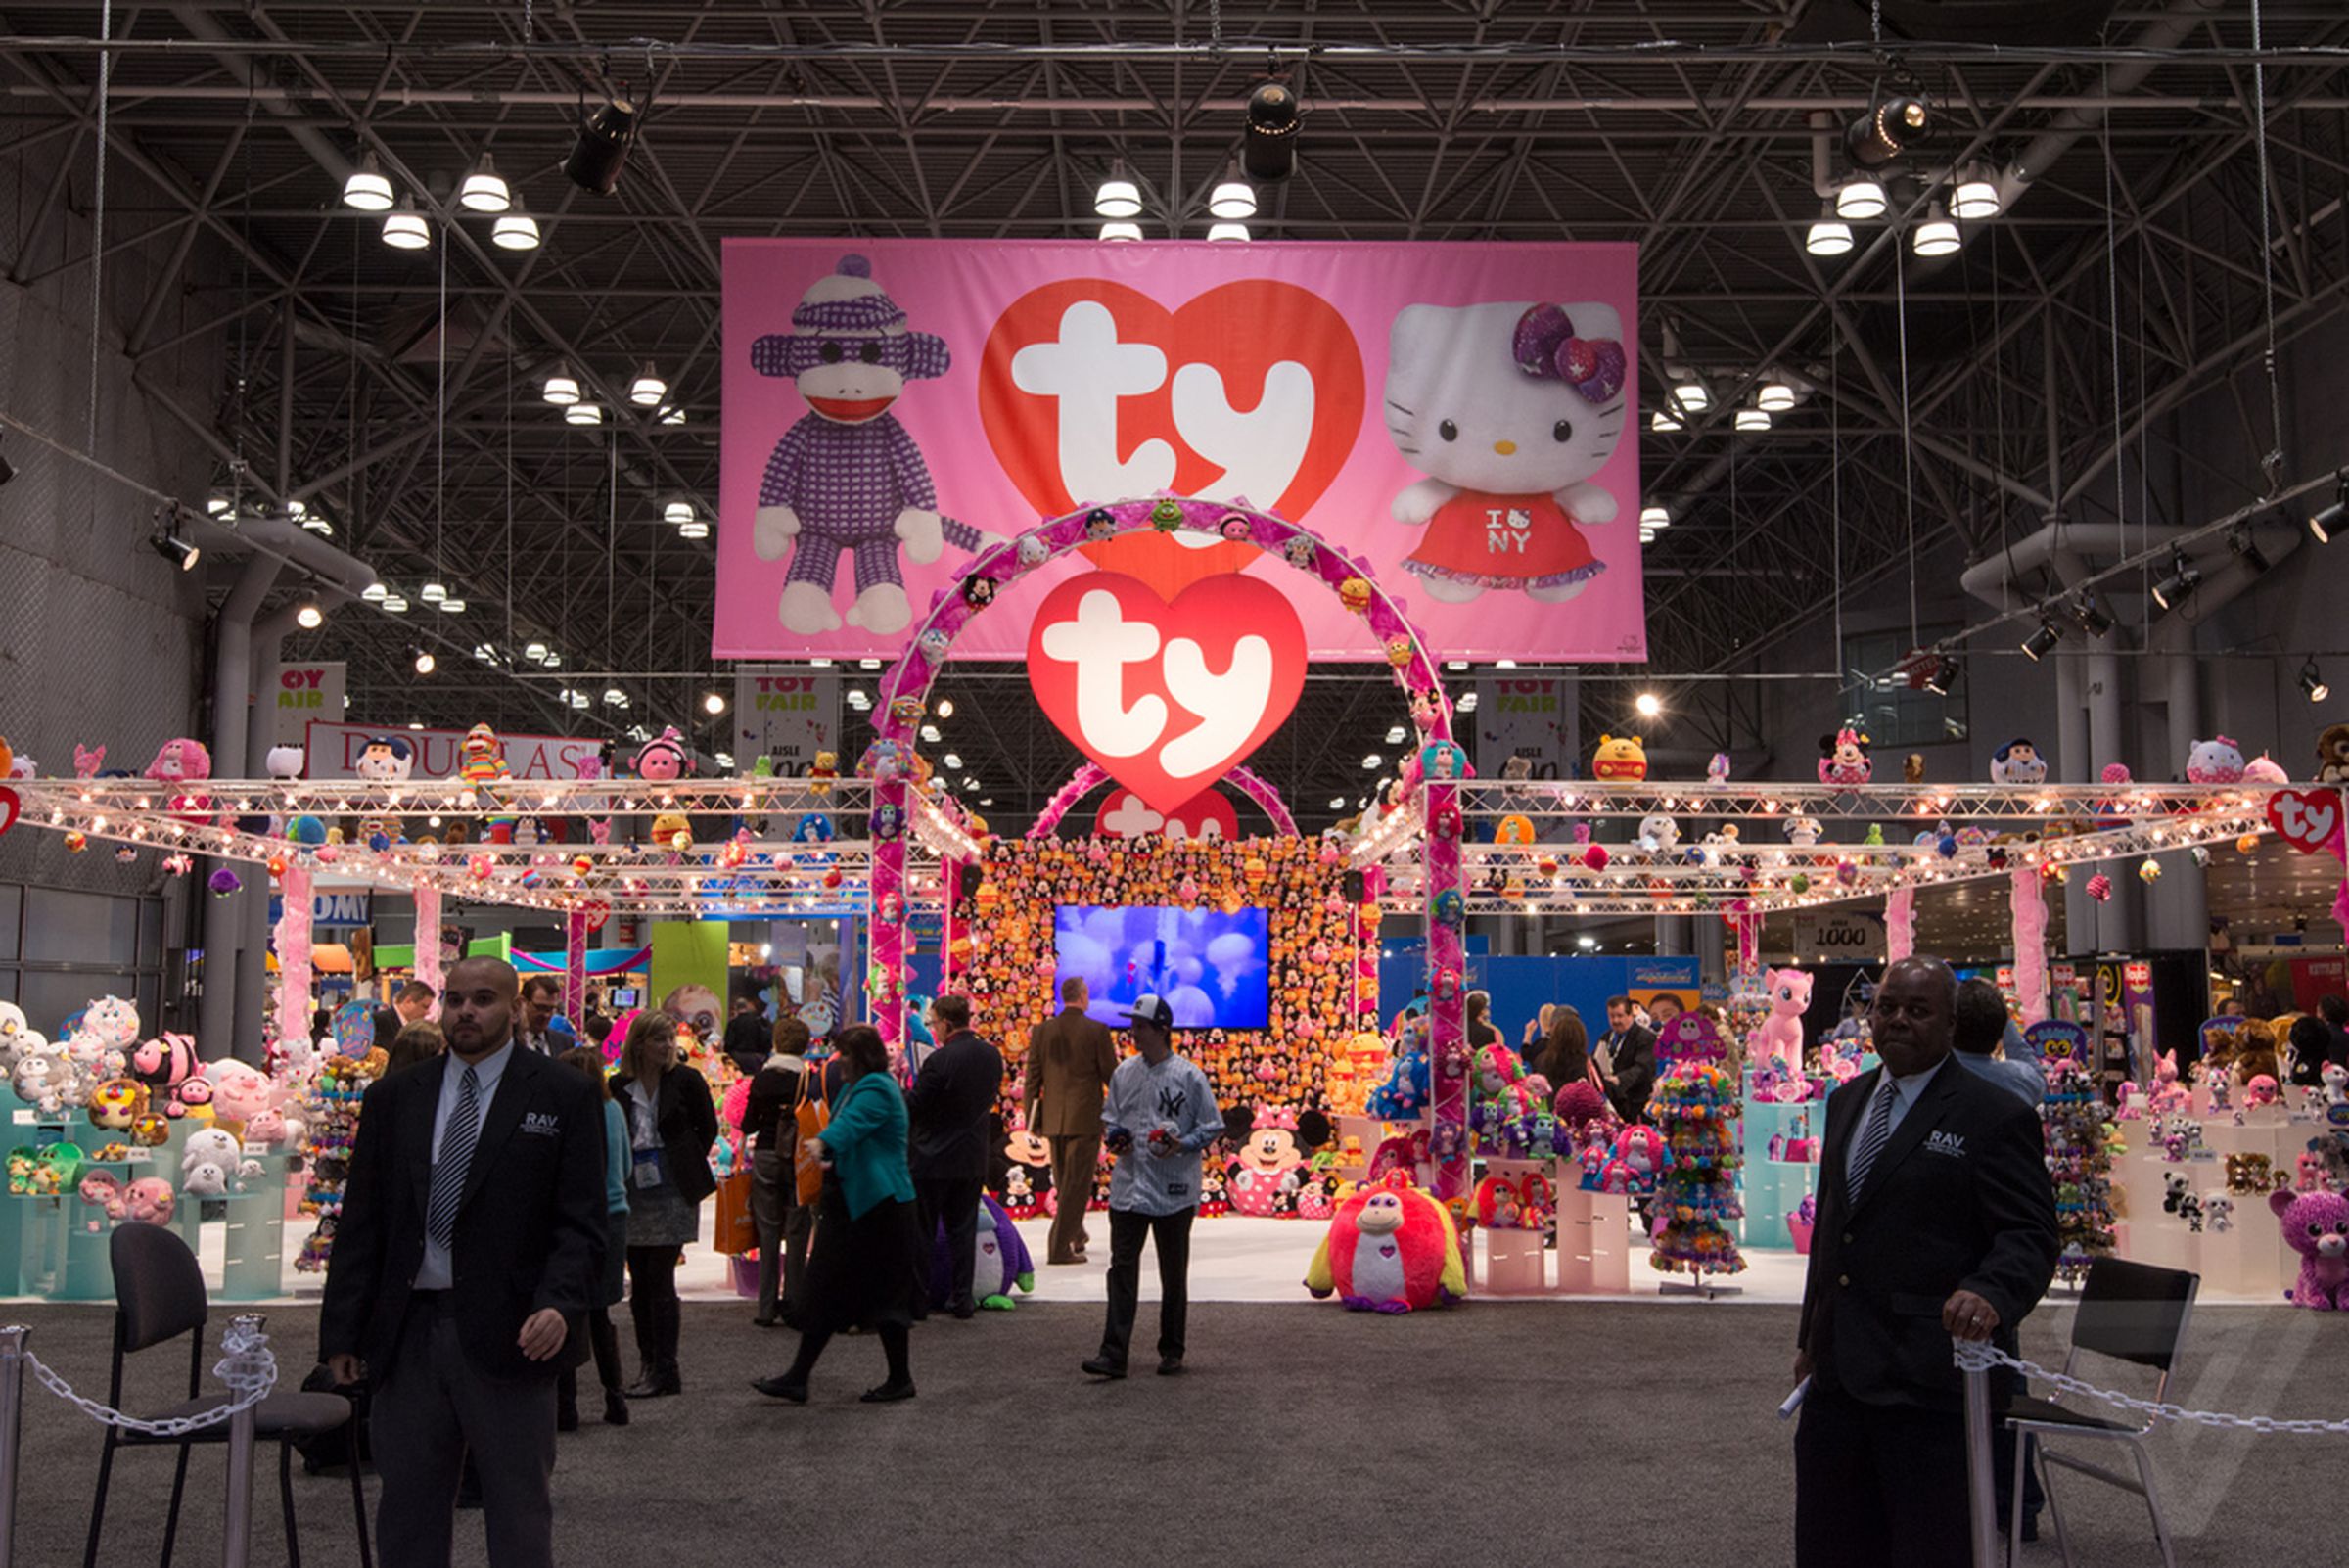 Toy Fair 2013 in pictures